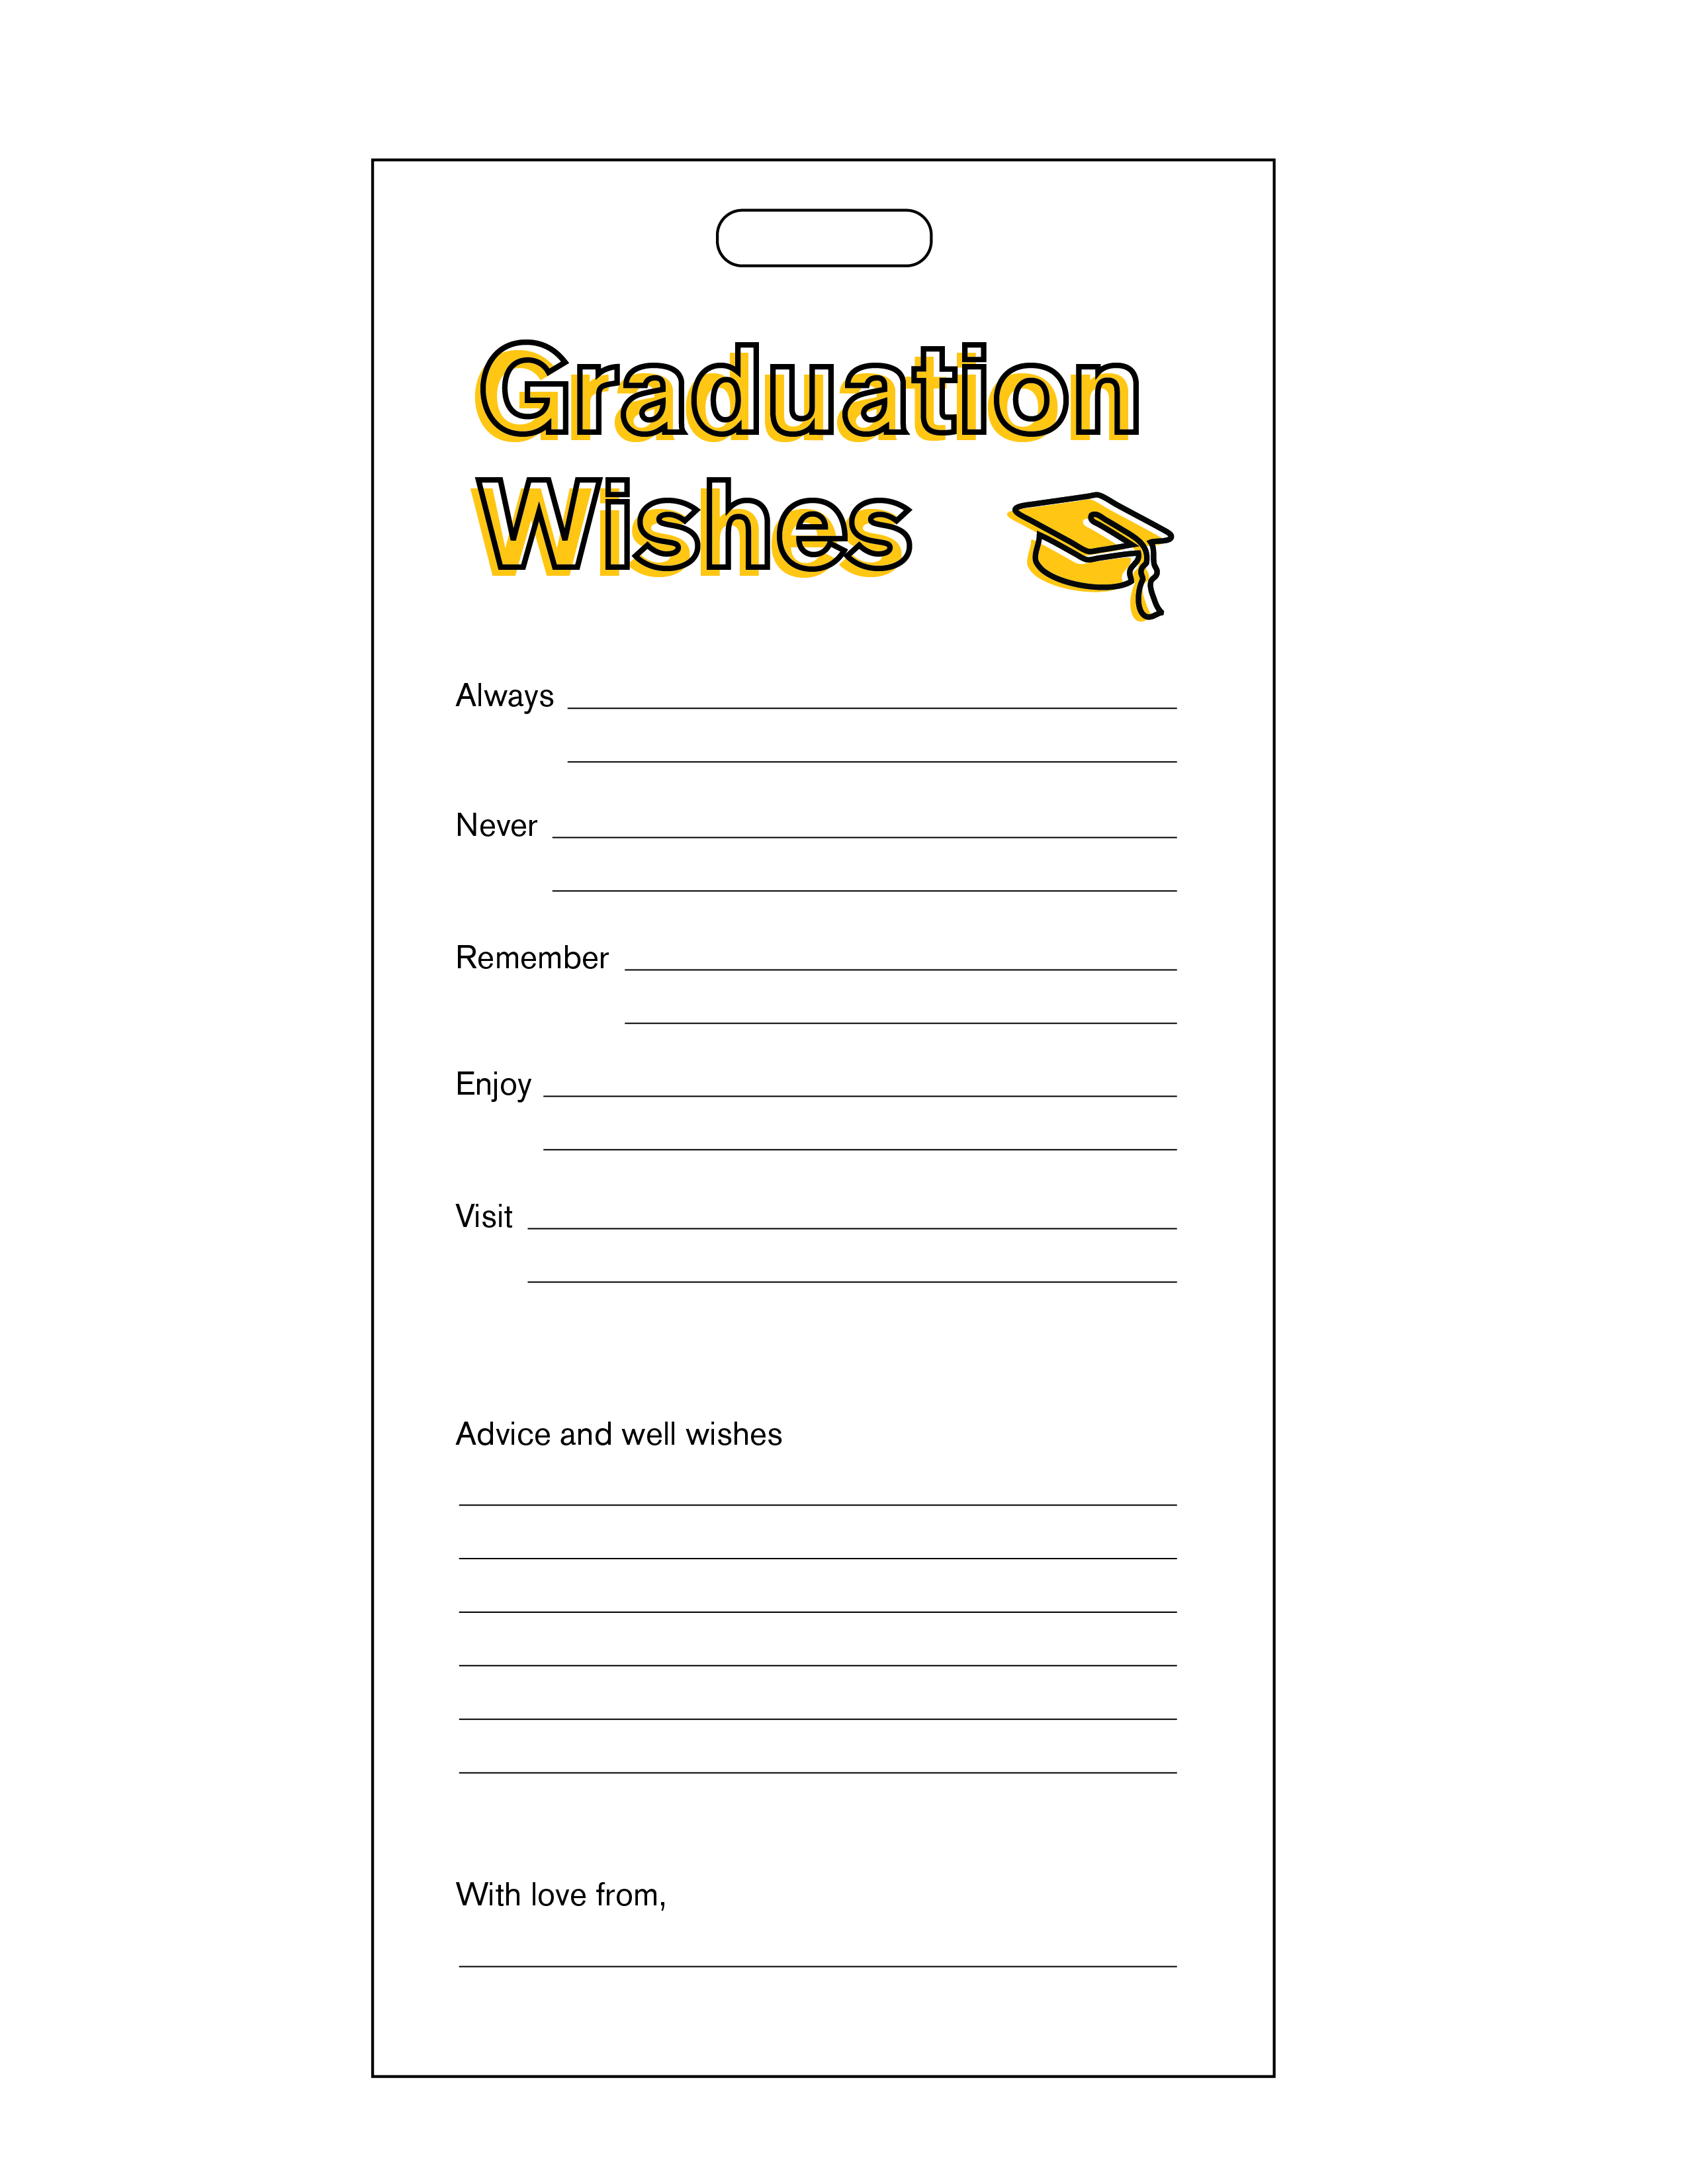 Graduation wishes card with white background